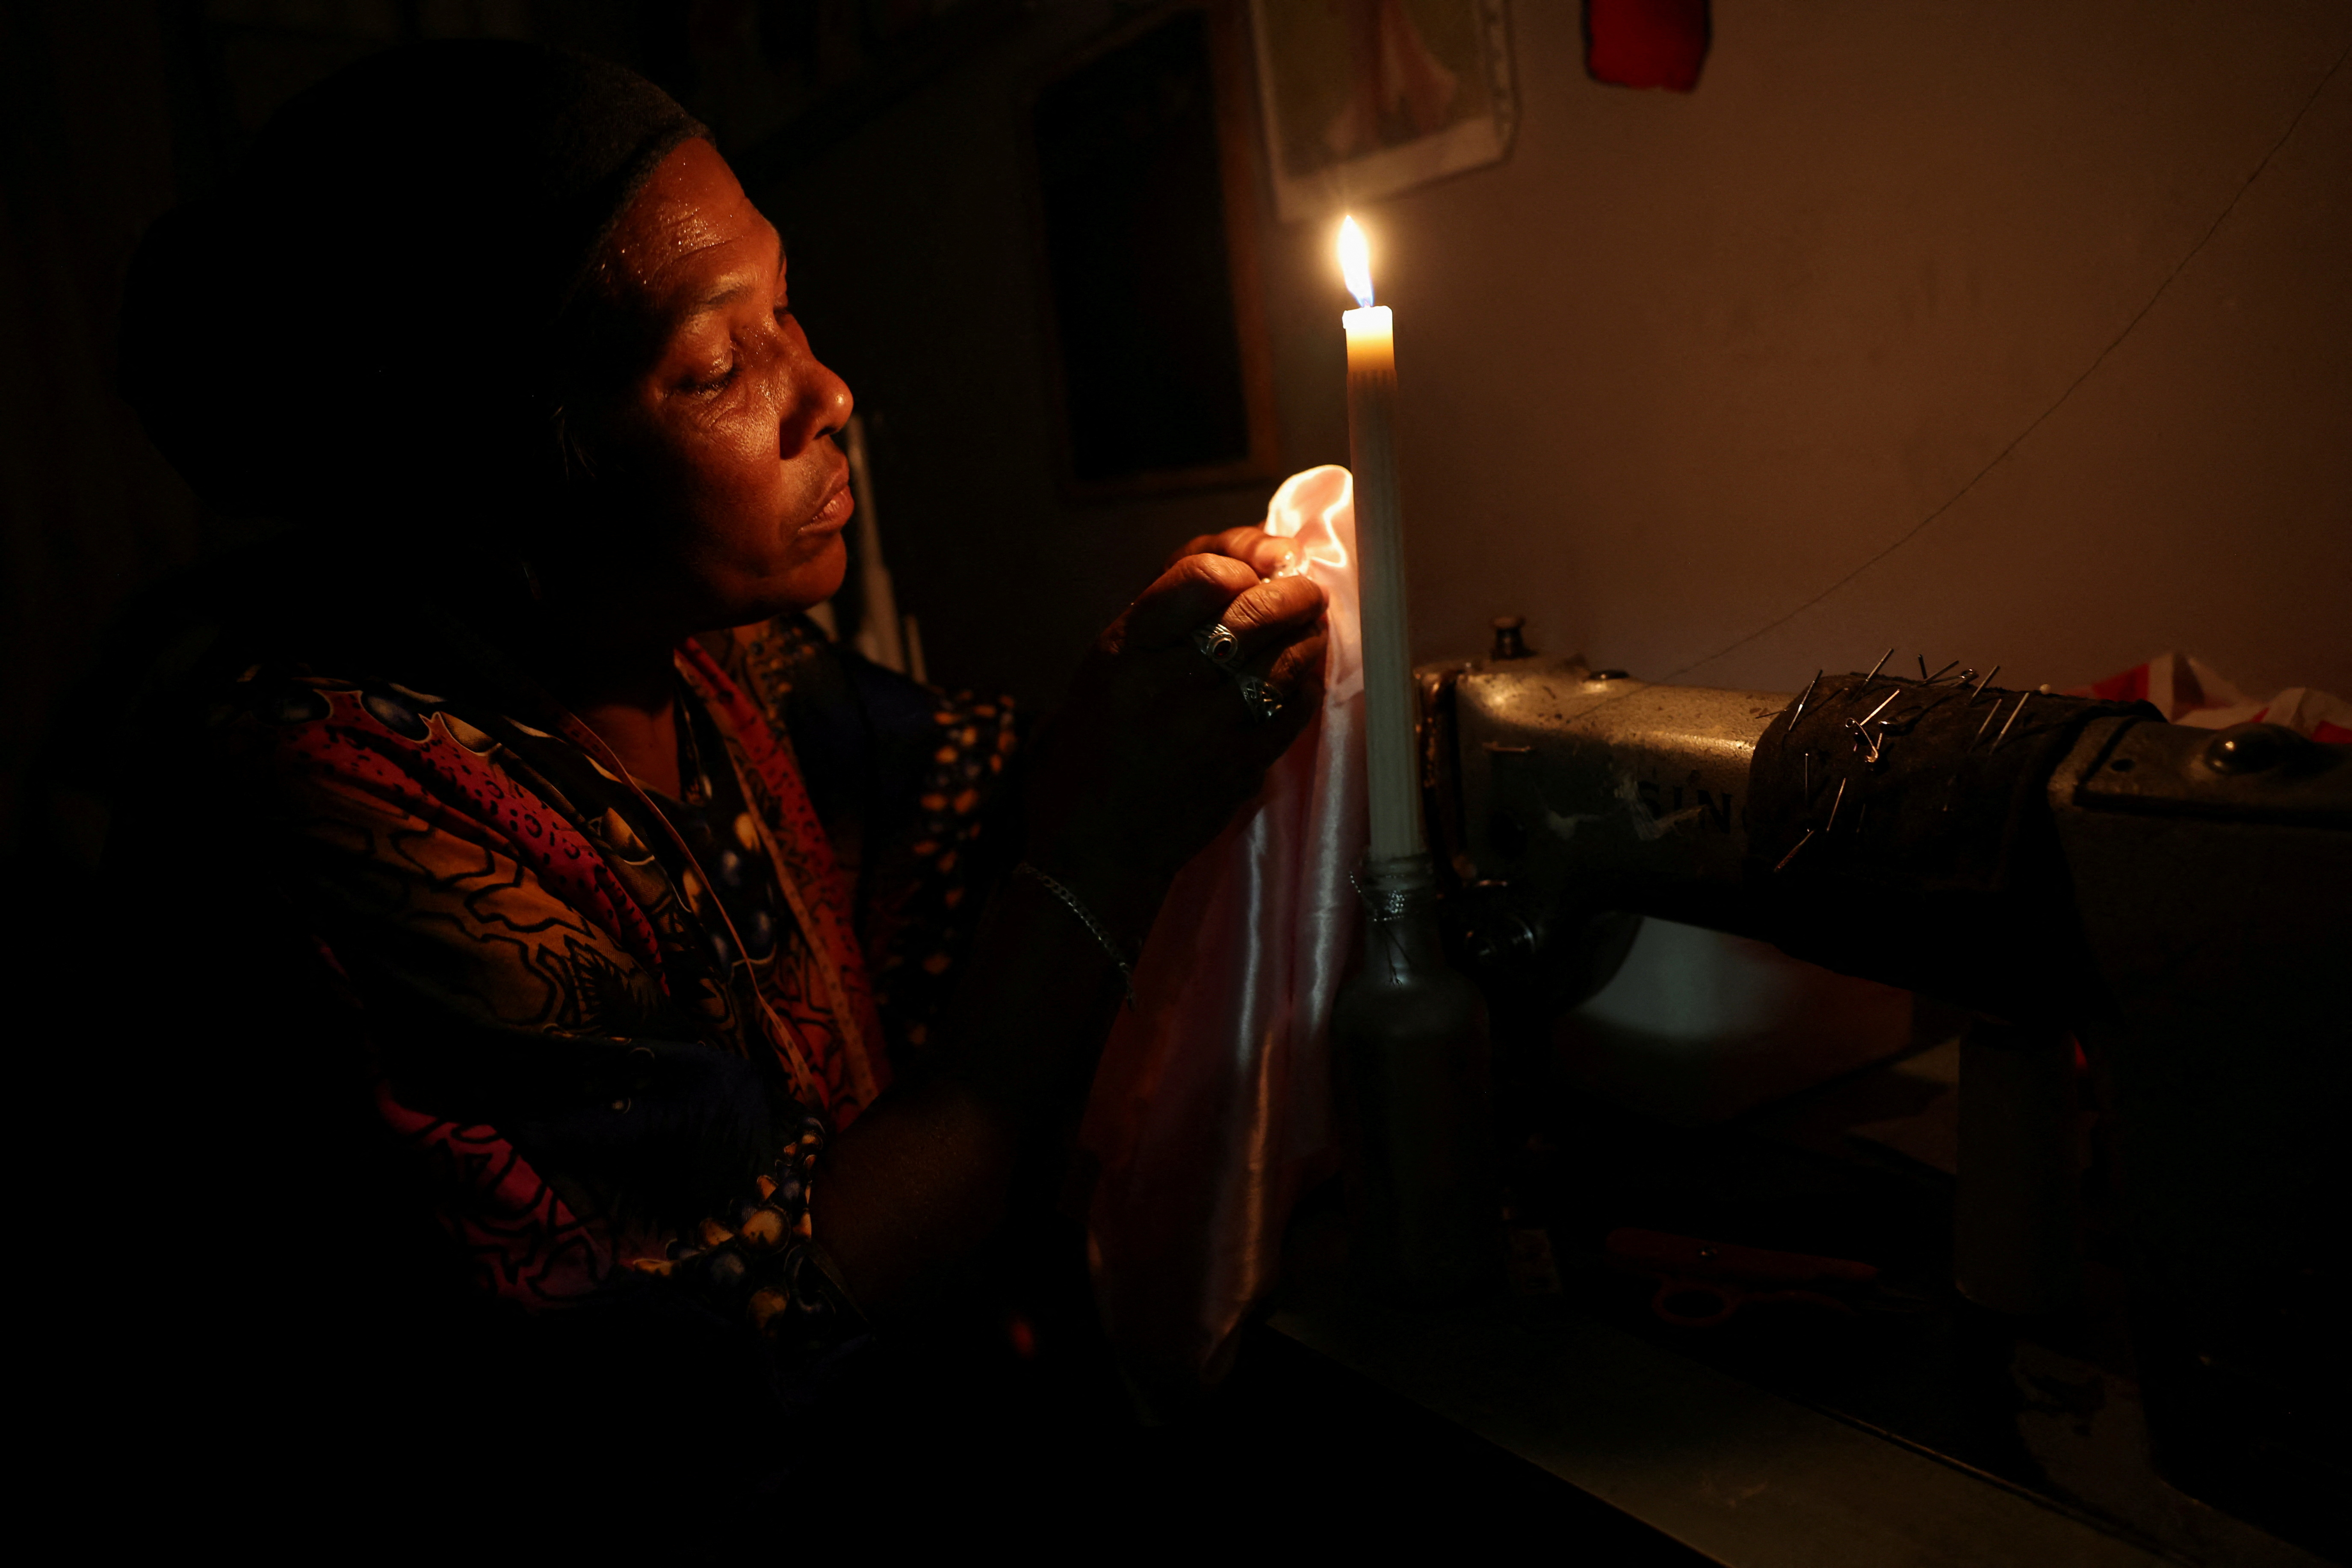 Dressmaker Faieza Caswell from Mitchells Plain sews under candlelight in her workplace, in Cape Town